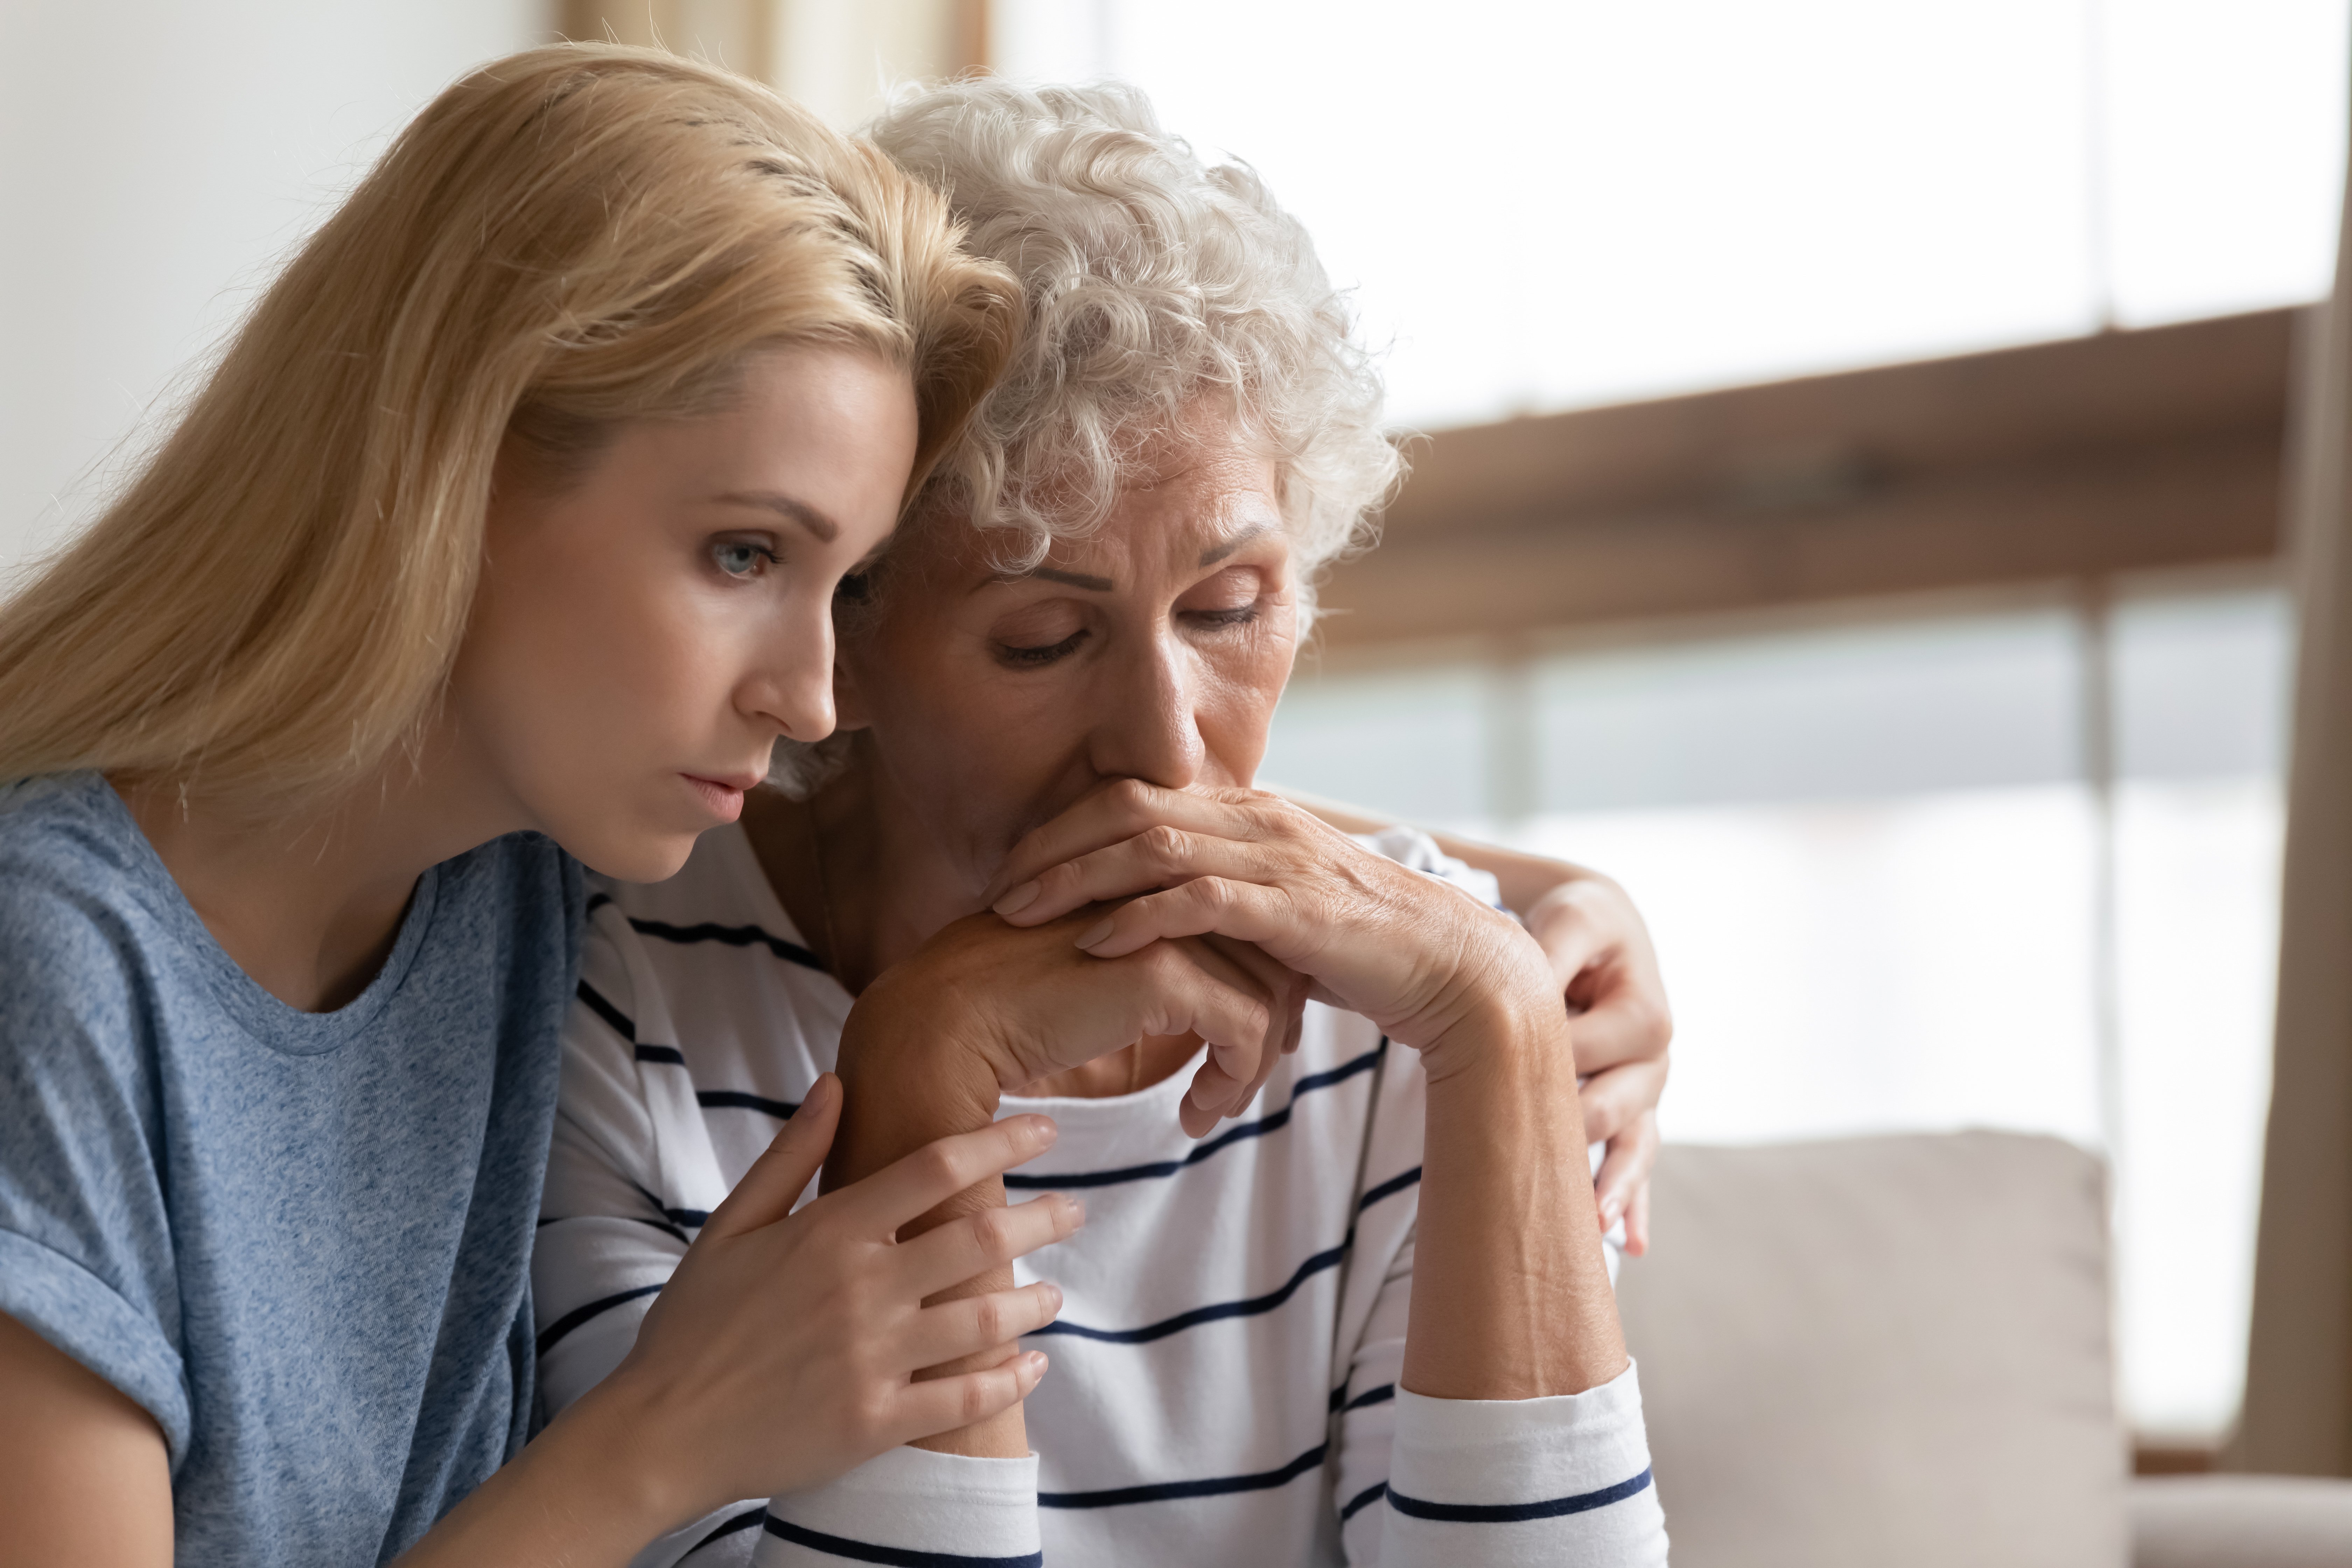 A young woman comforting an older lady | Source: Shutterstock